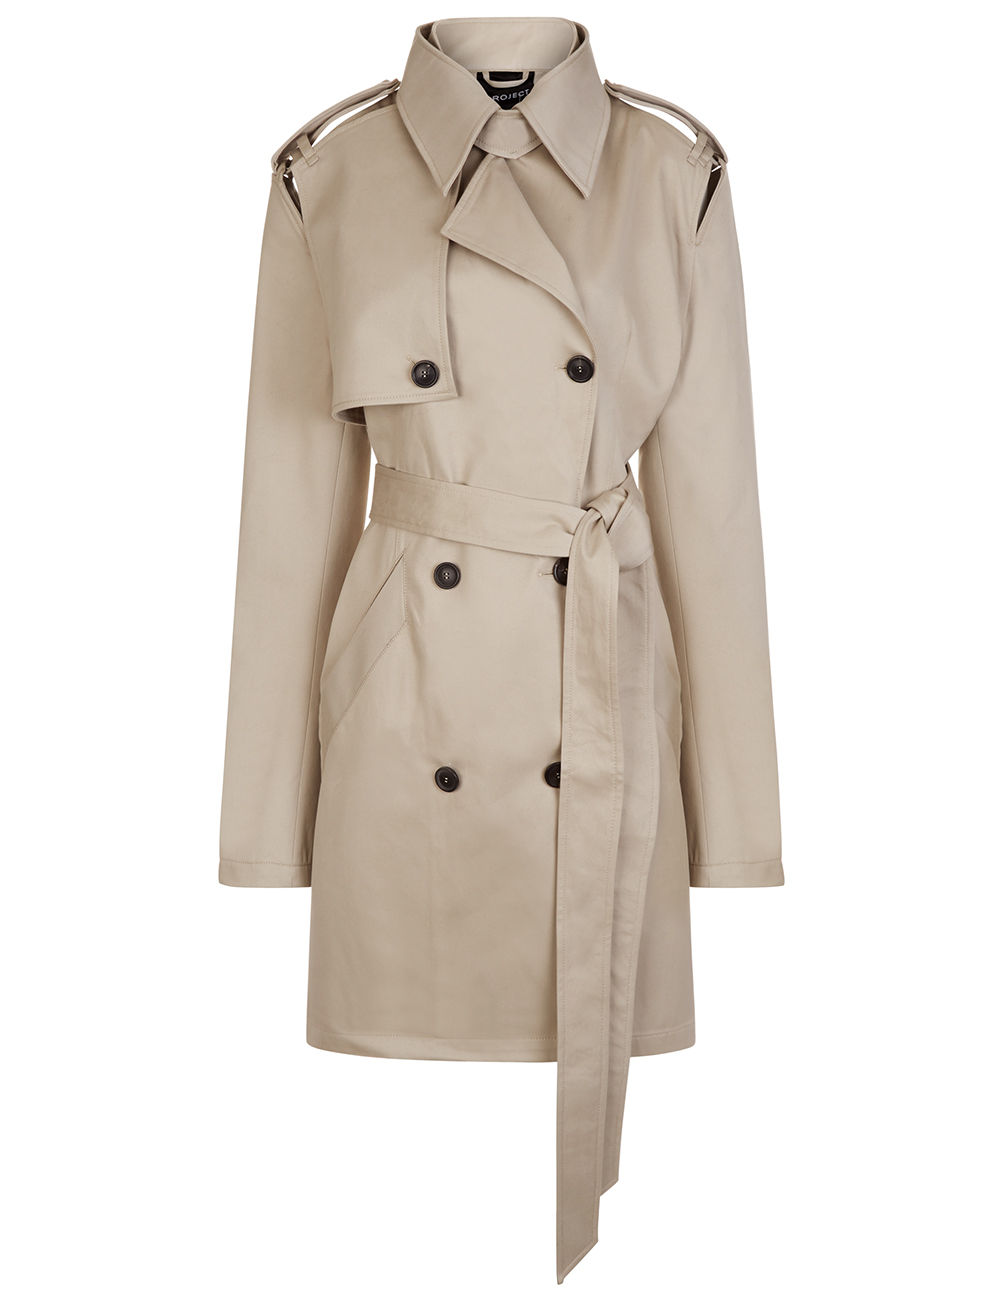 Y Project - Khaki Double Breasted Trench Coat | FASHION STYLE FAN